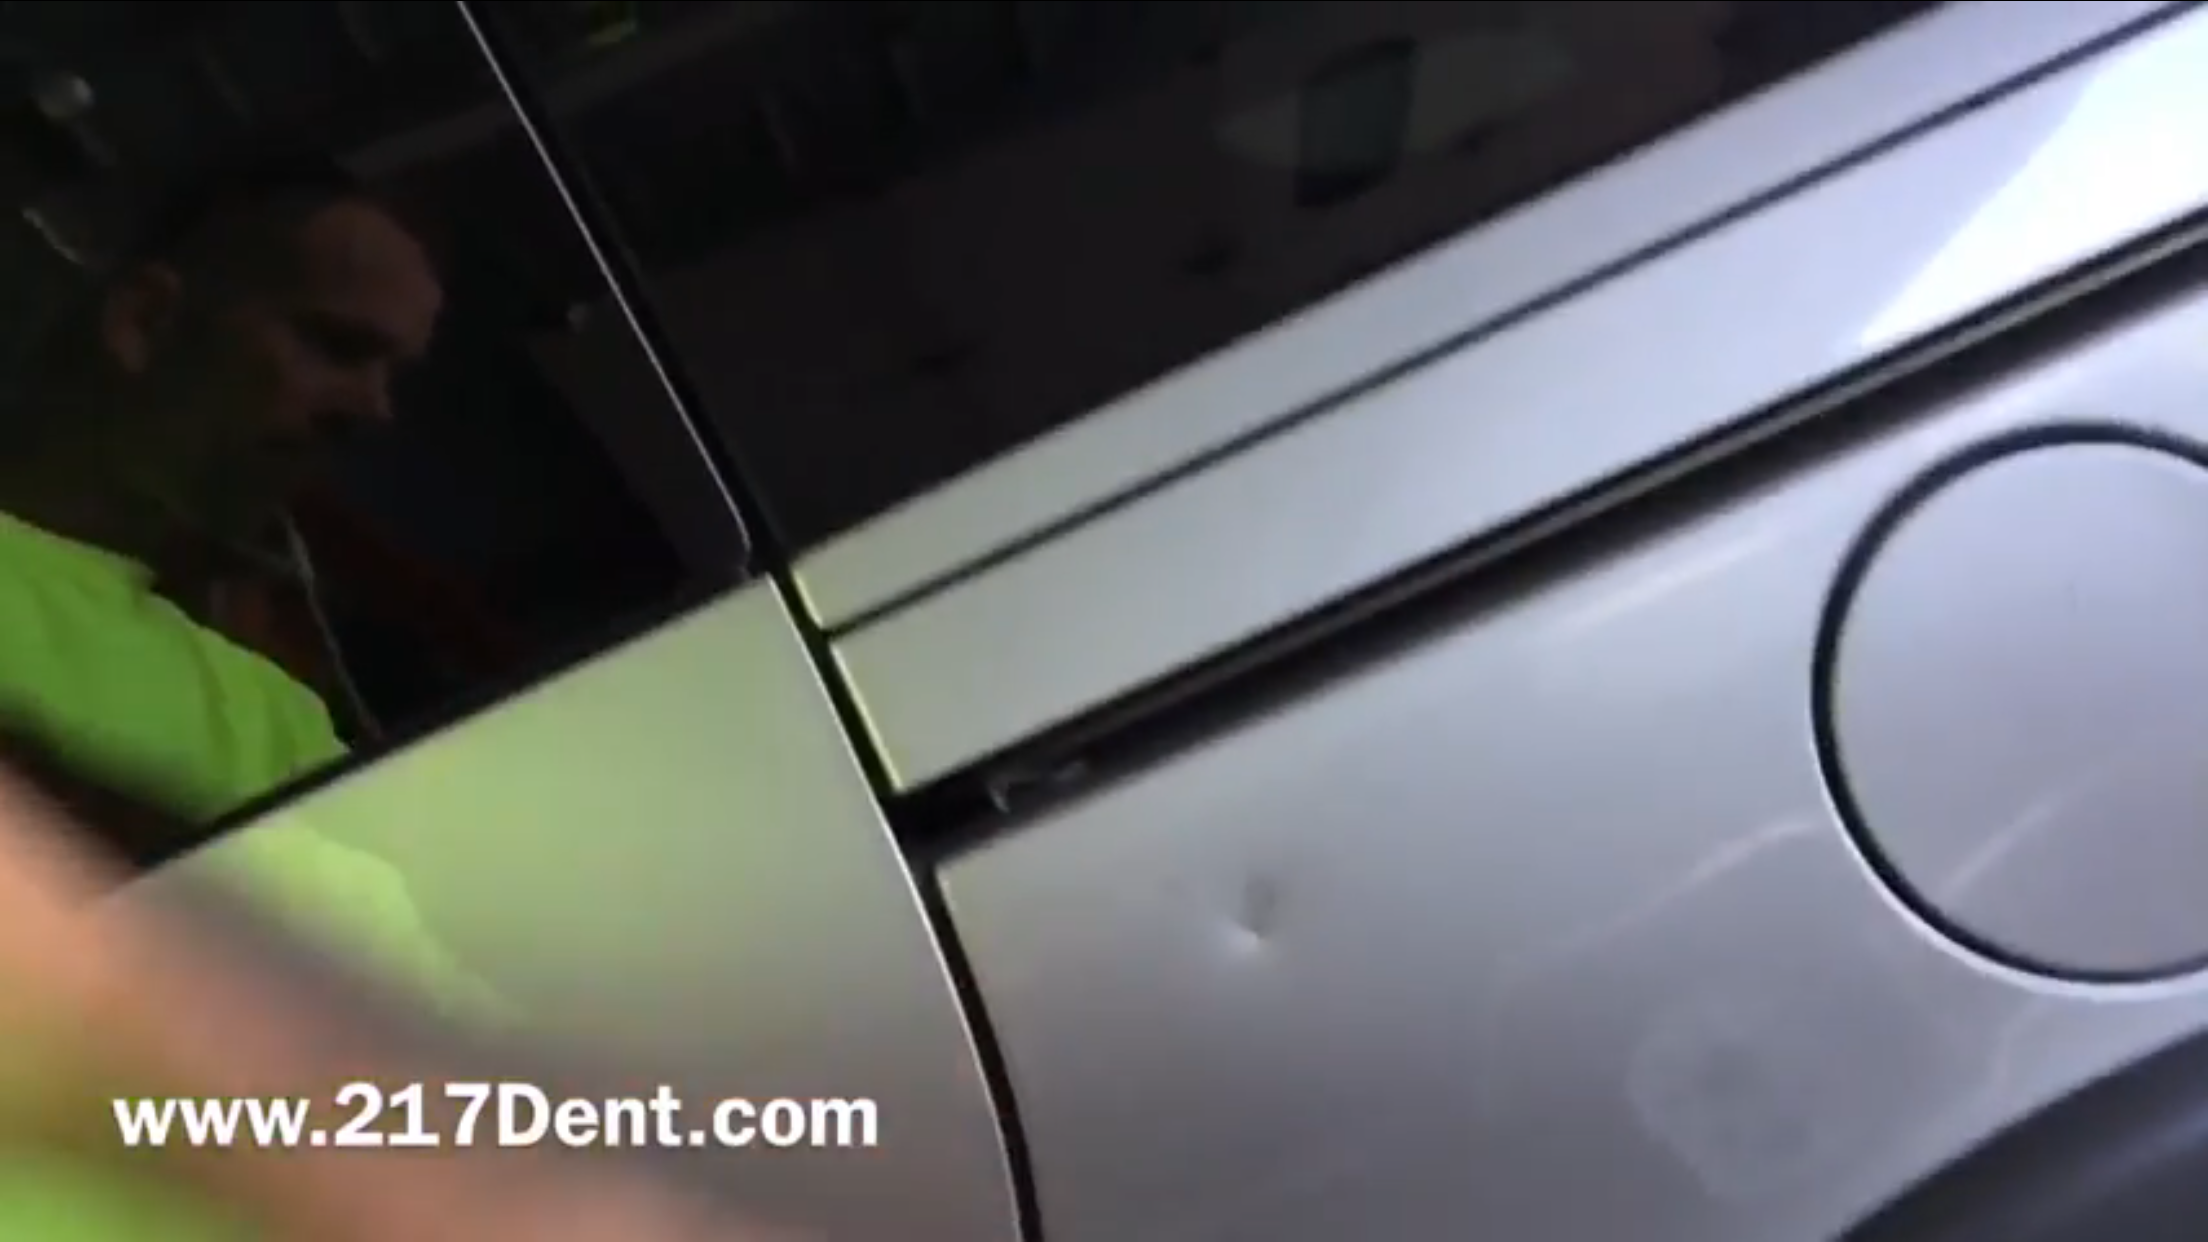 2004 Montana Van, Dent removal, paintless Dent Removal, Springfield, IL, http://217dent.com